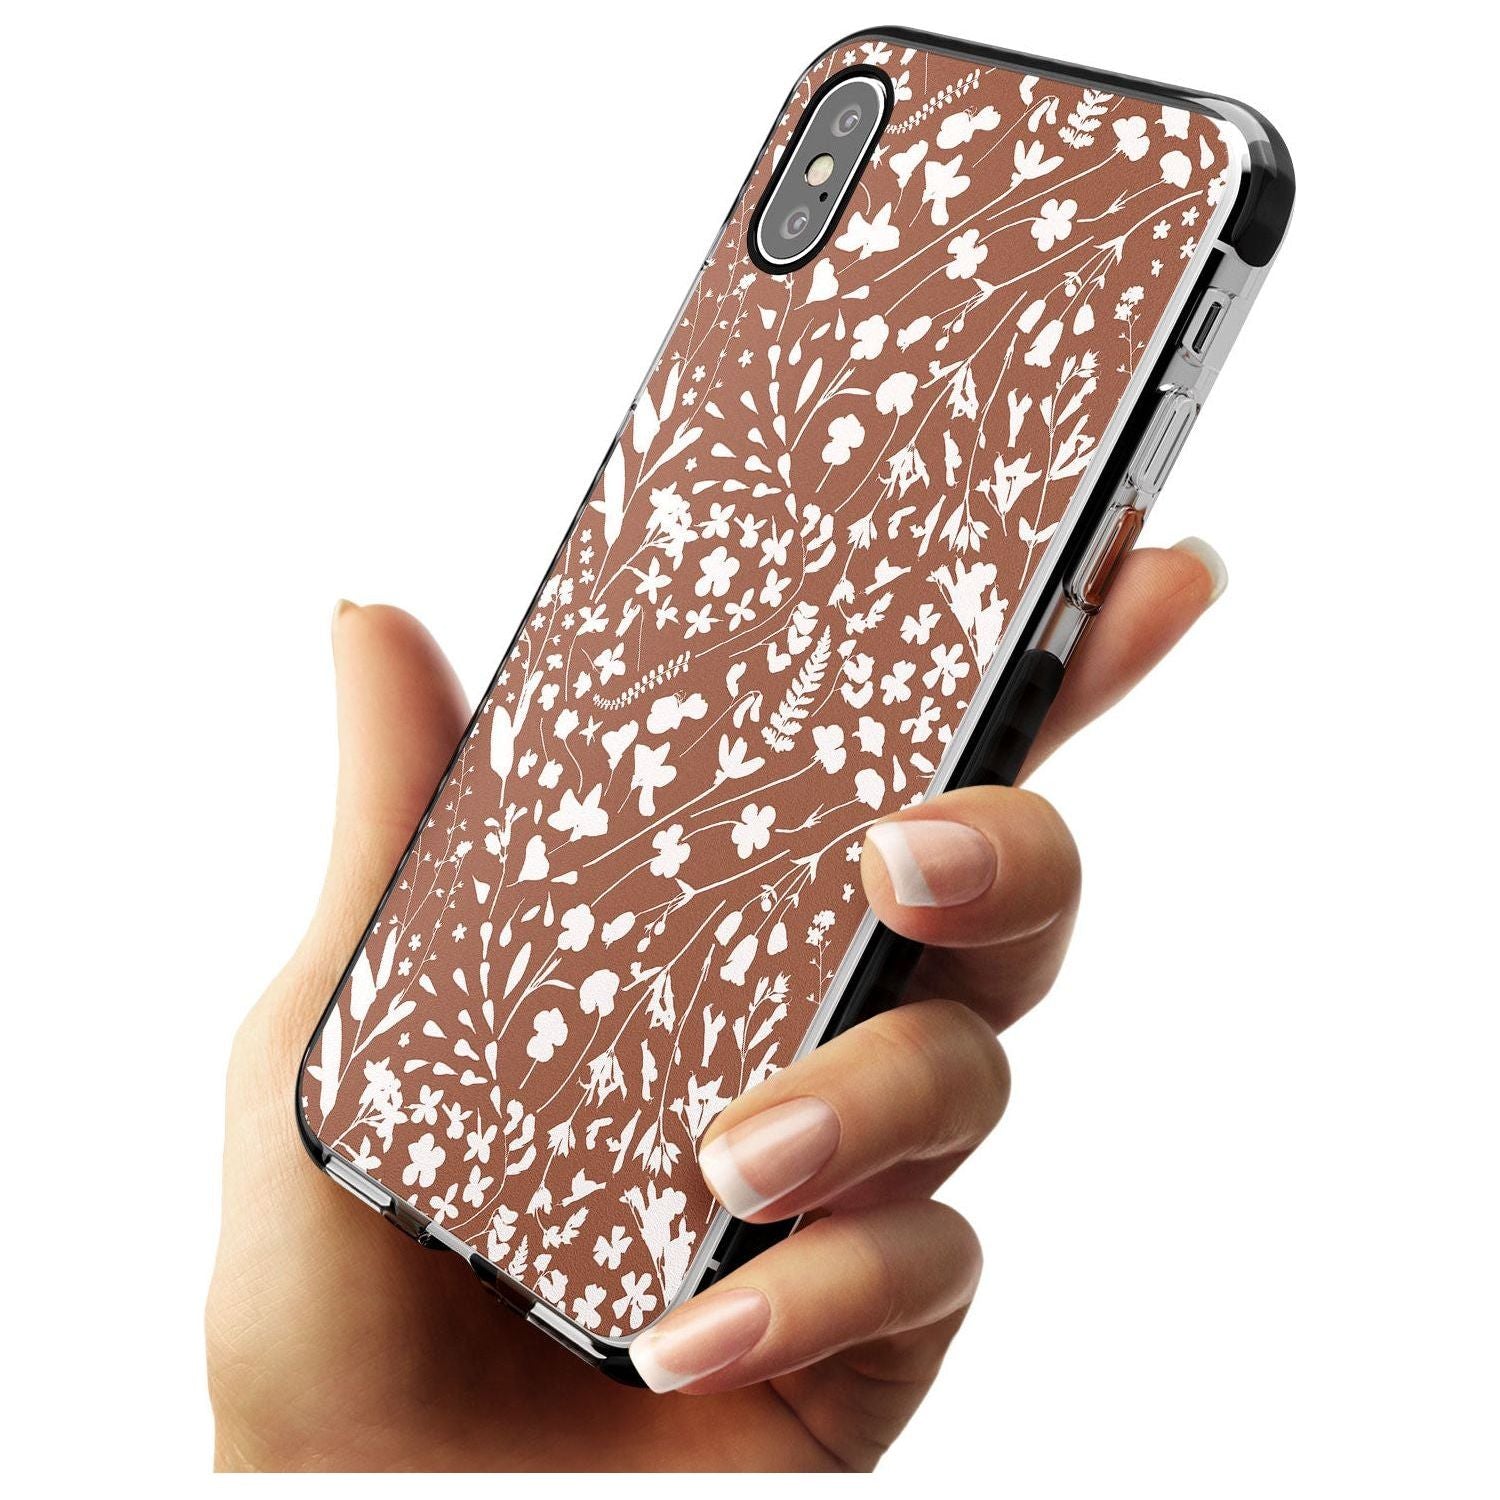 Wildflower Cluster on Terracotta Black Impact Phone Case for iPhone X XS Max XR